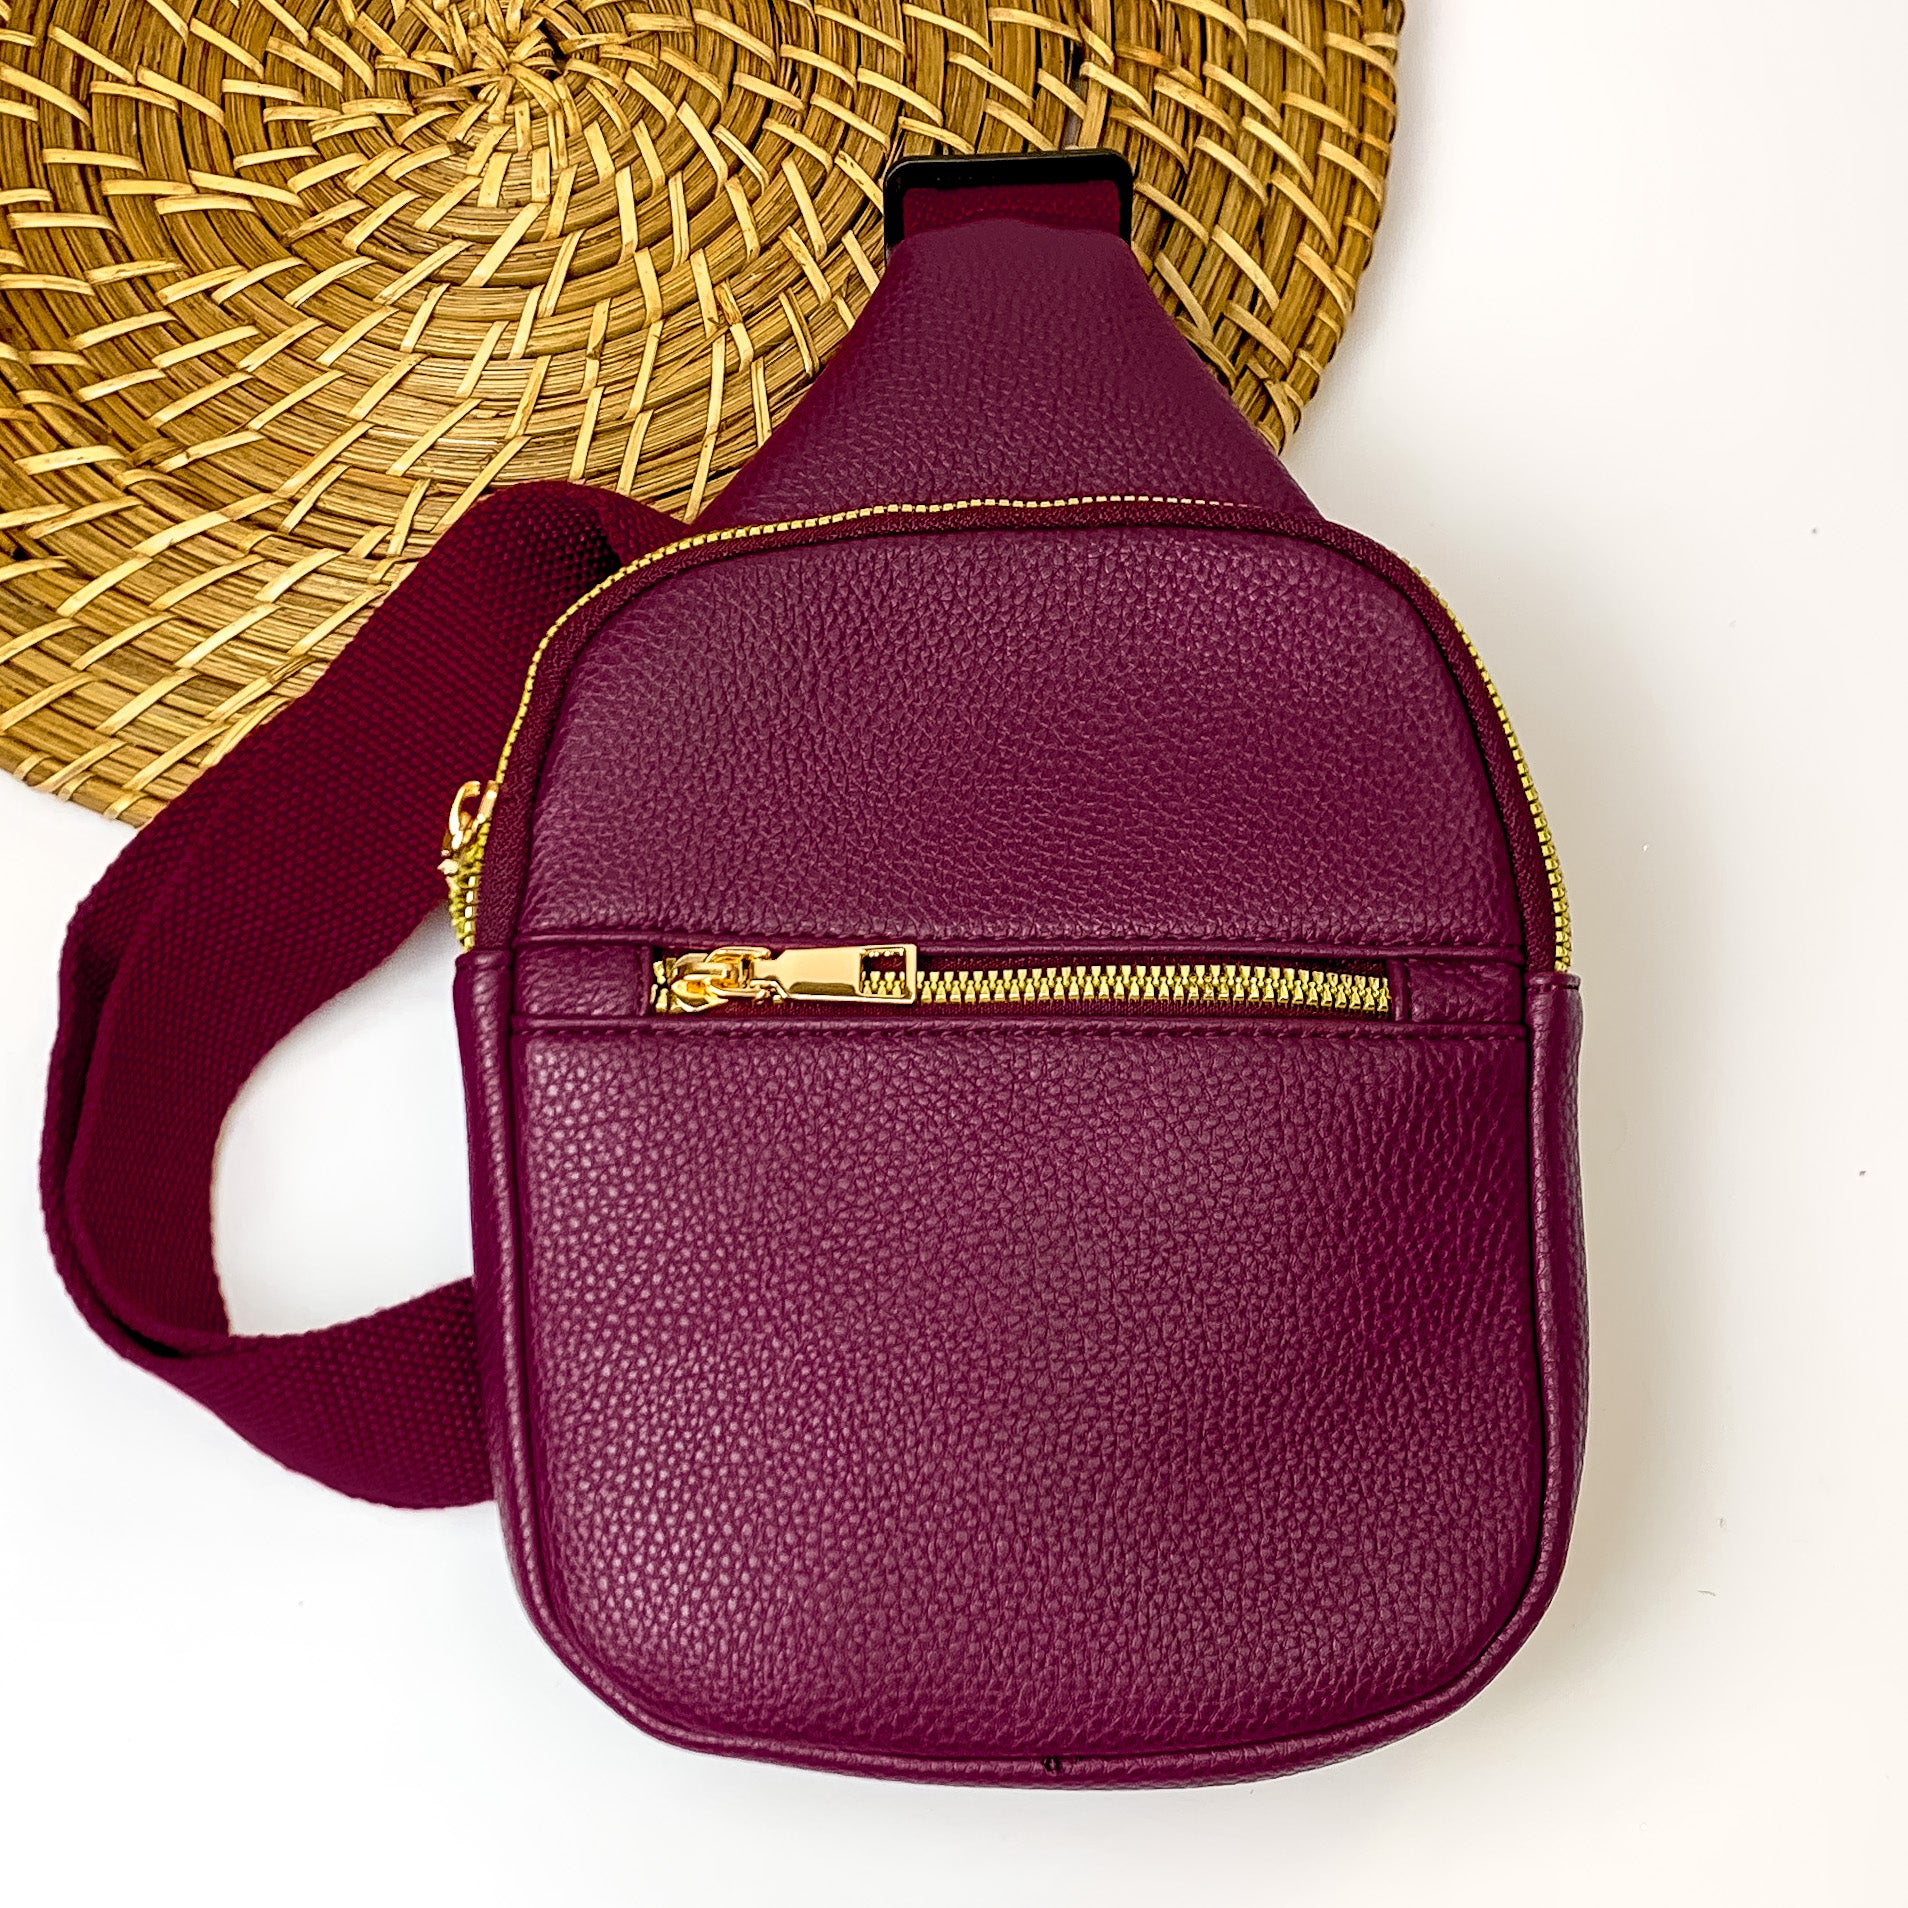 Sling Backpack in Wine Red